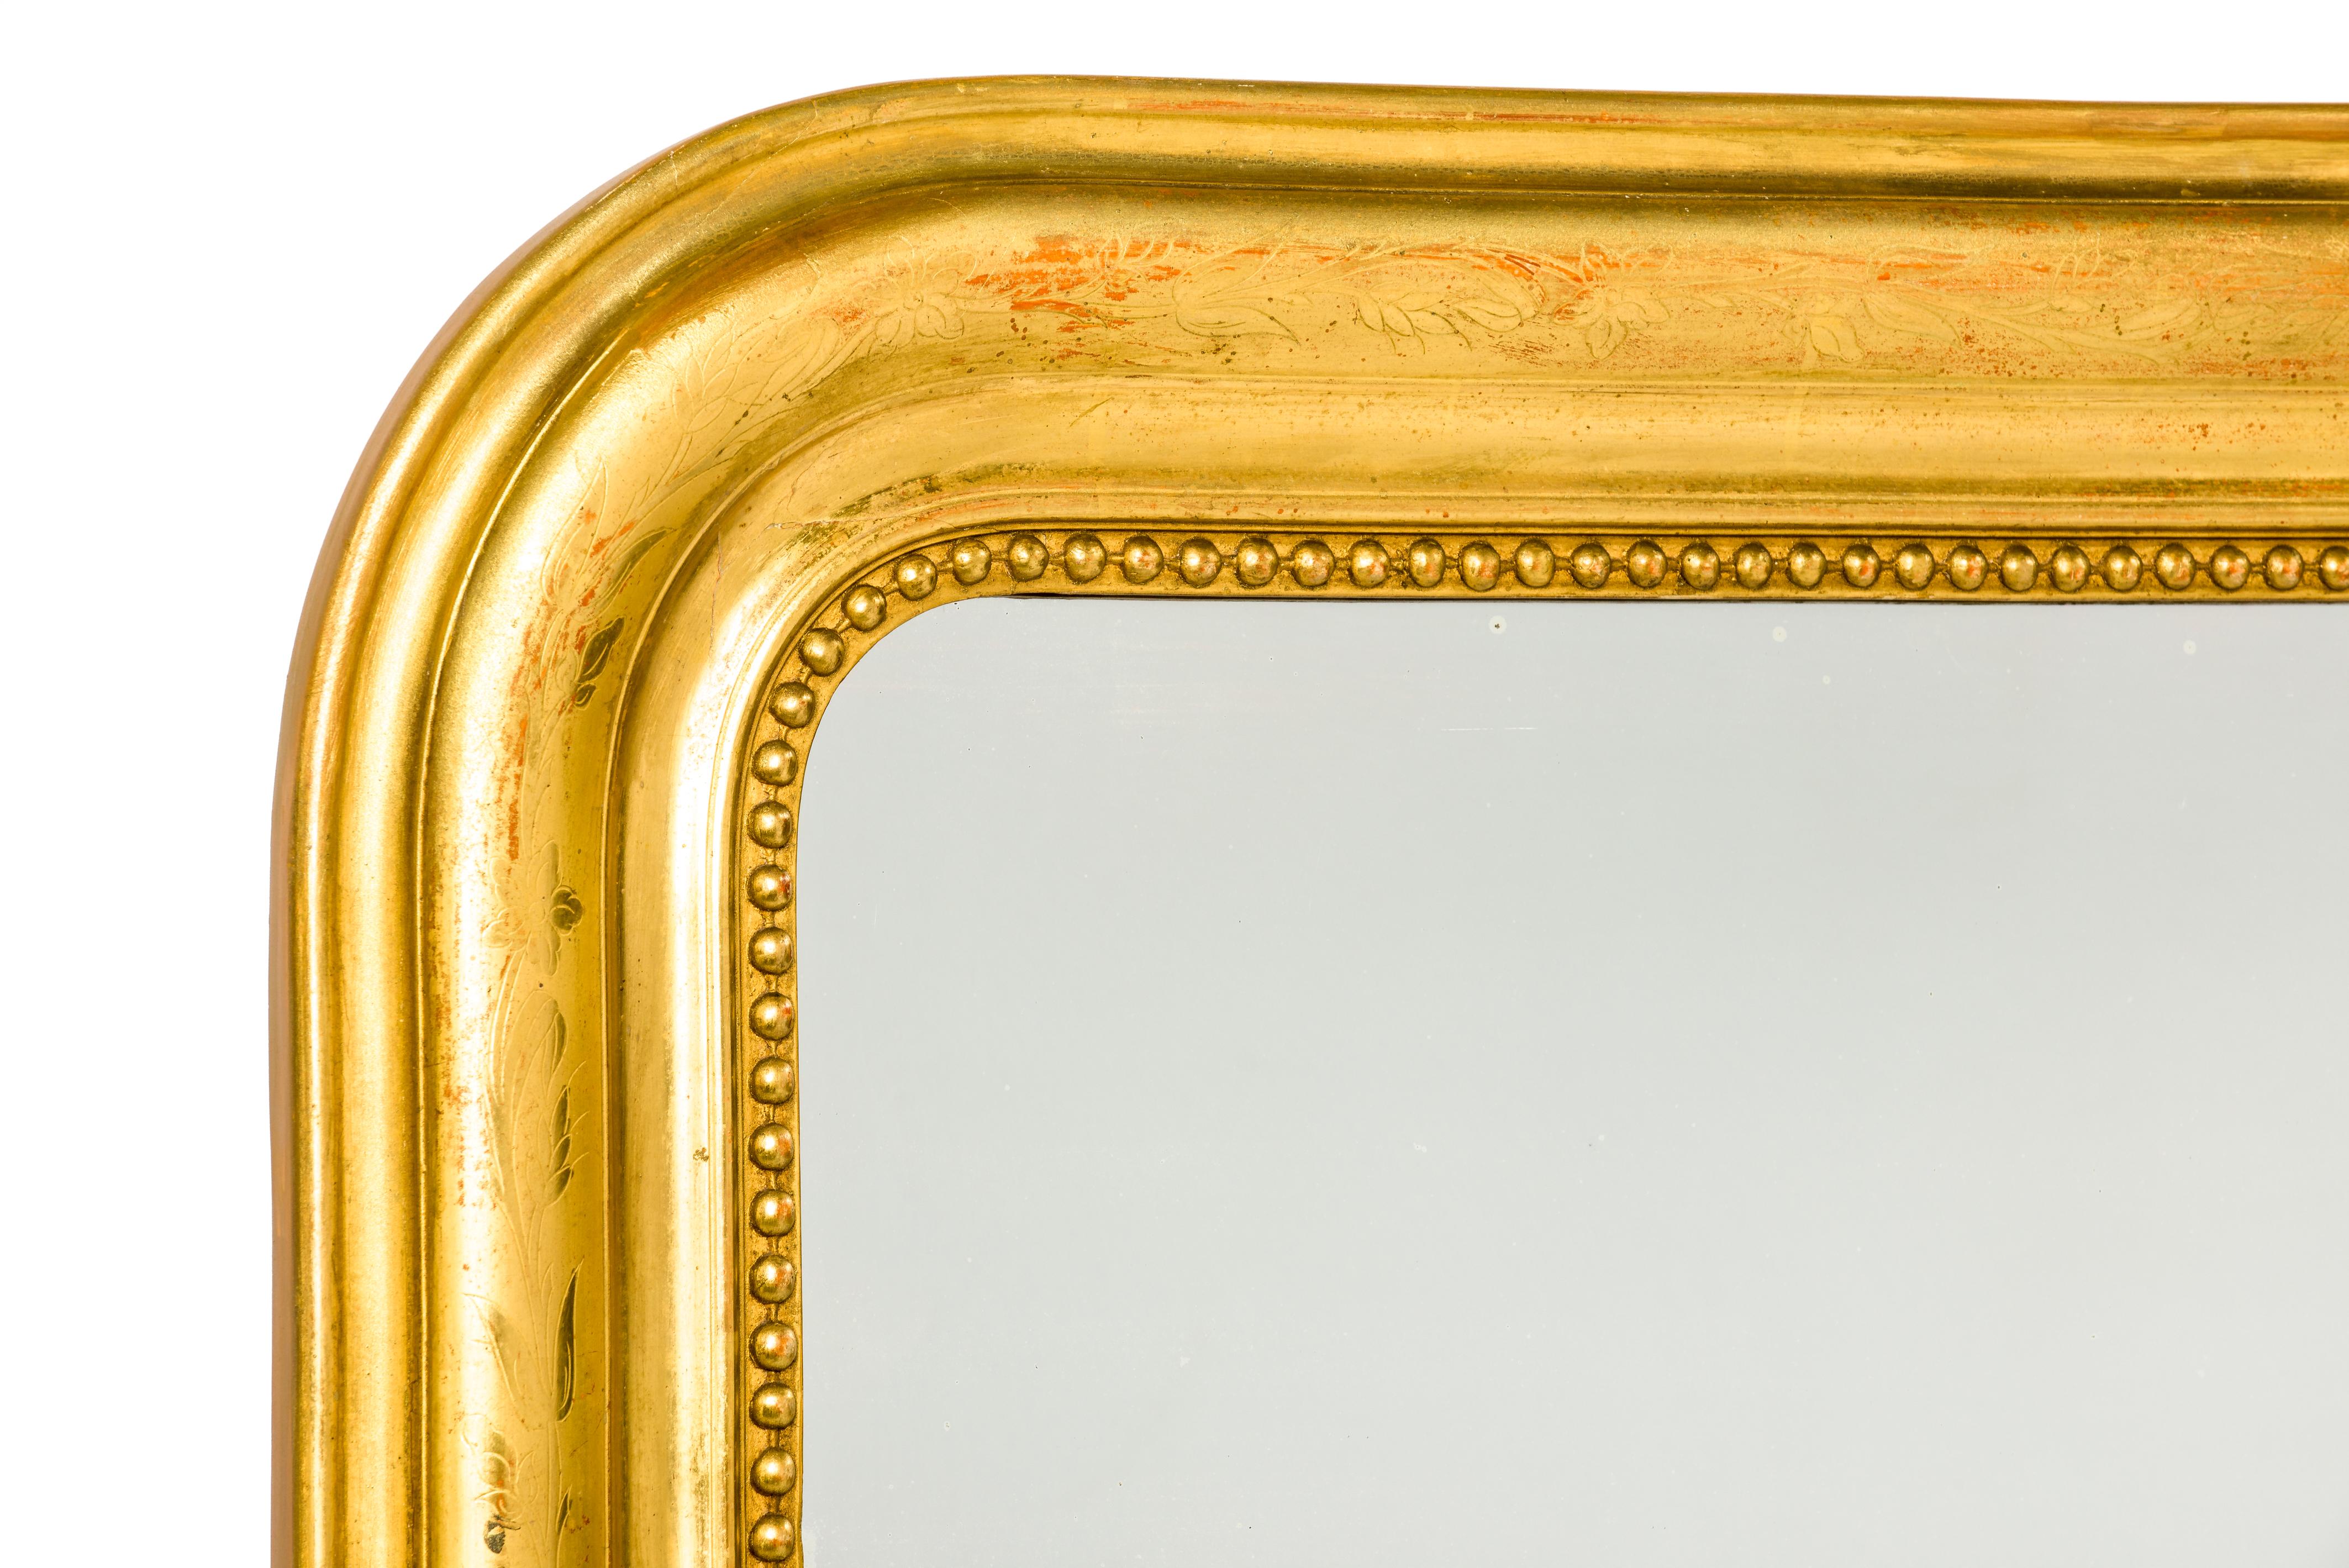 This beautiful and tall antique French mirror is completely gold leaf gilt and is made in Louis Philippe style with it's typical rounded upper corners. The mirror frame has a classic pearl beading surrounding the glass. The most elevated part of the